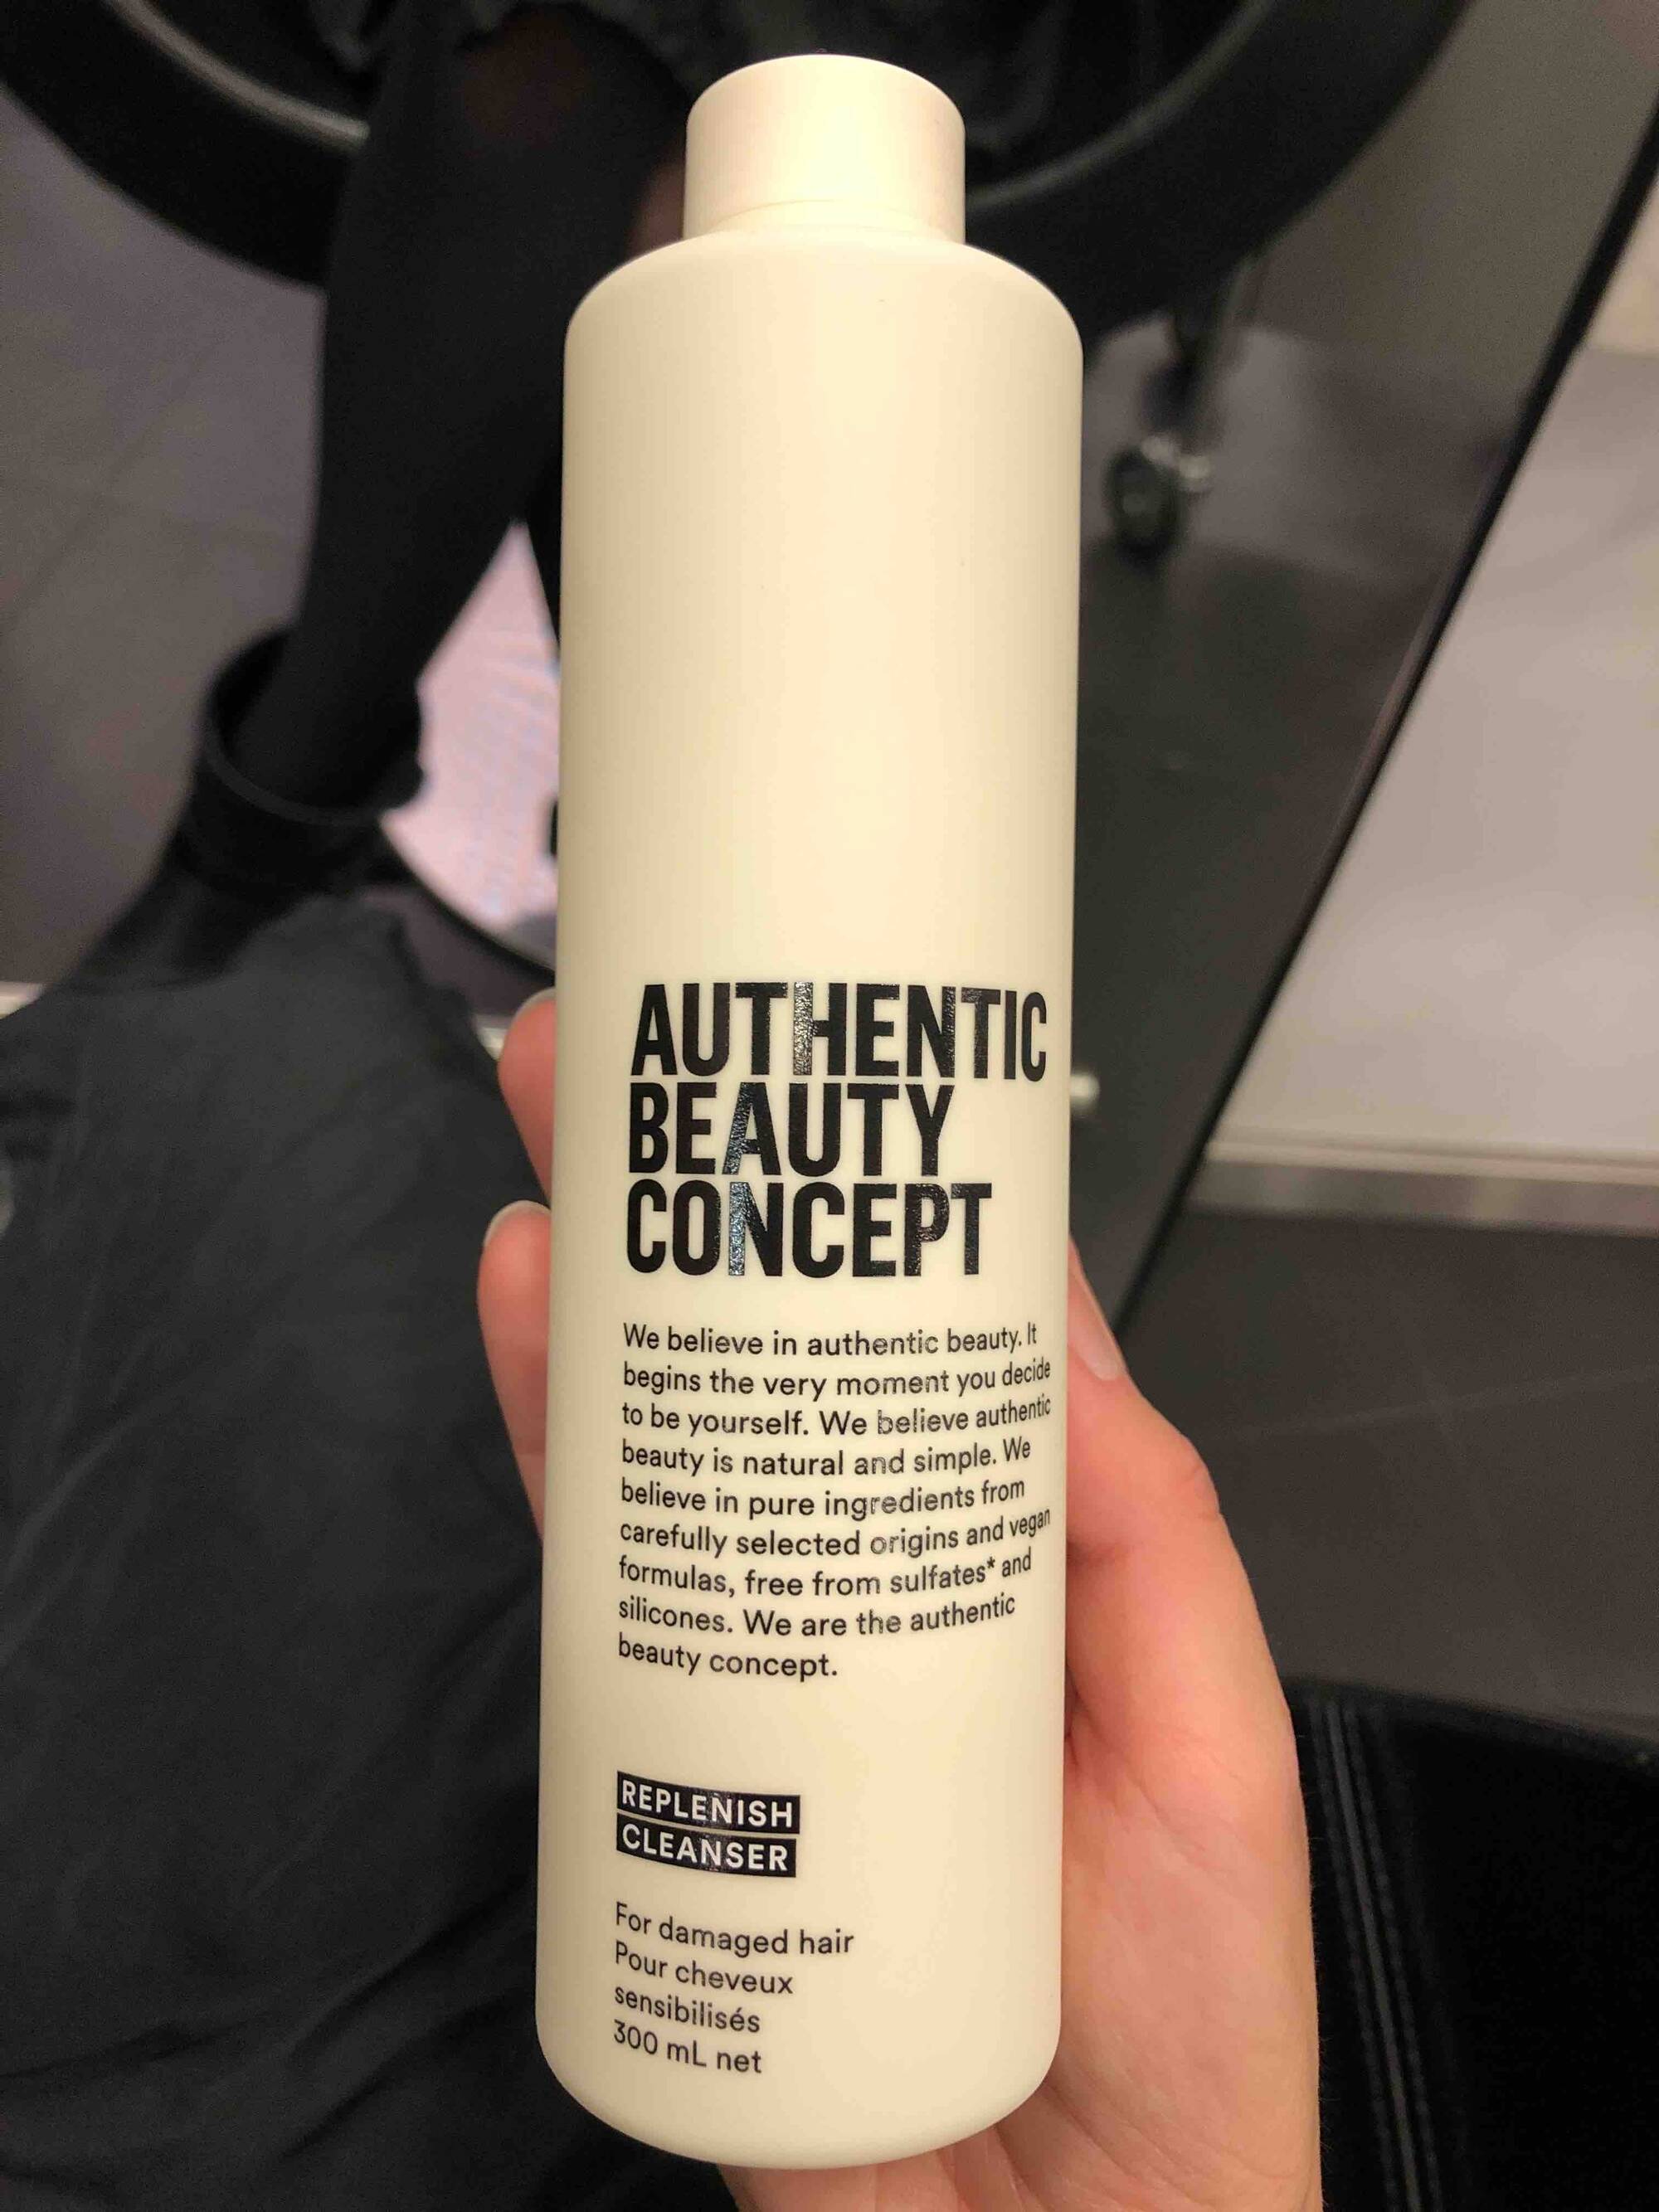 AUTHENTIC BEAUTY CONCEPT - Replenish cleanser for damaged hair